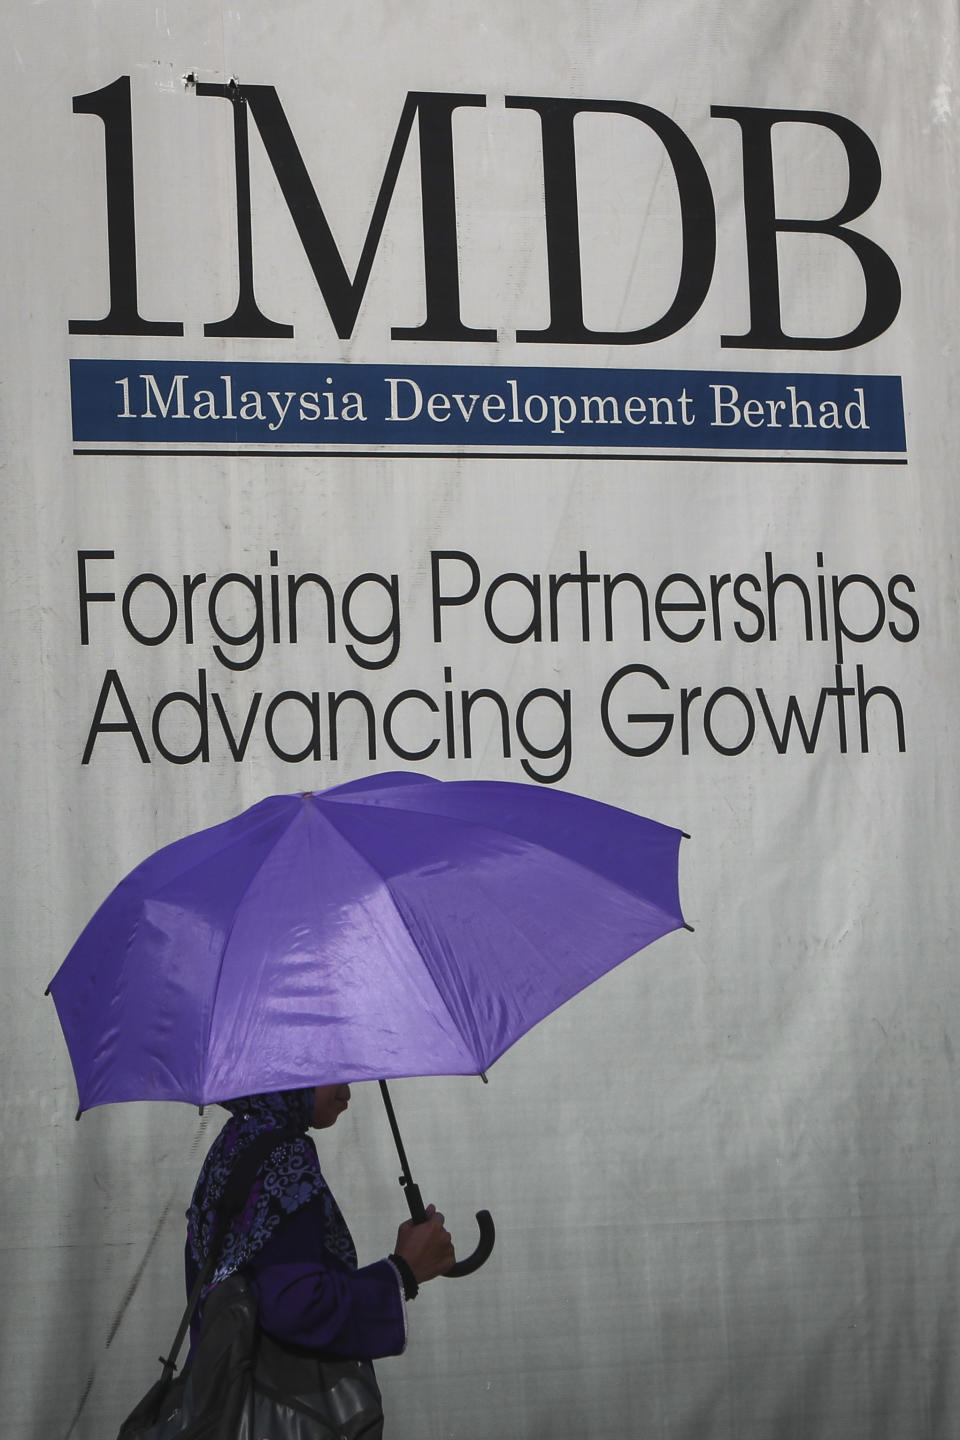 A Malaysian Muslim woman walks past a 1Malaysia Development Berhad (1MDB) billboard at the flagship's development site in Kuala Lumpur, Malaysia, July 8, 2015. Najib Razak on Tuesday, Aug. 23, 2022 was Malaysia’s first former prime minister to go to prison -- a mighty fall for a veteran British-educated politician whose father and uncle were the country’s second and third prime ministers, respectively. The 1MDB financial scandal that brought him down was not just a personal blow but shook the stranglehold his United Malays National Organization party had over Malaysian politics. (AP Photo/Joshua Paul)